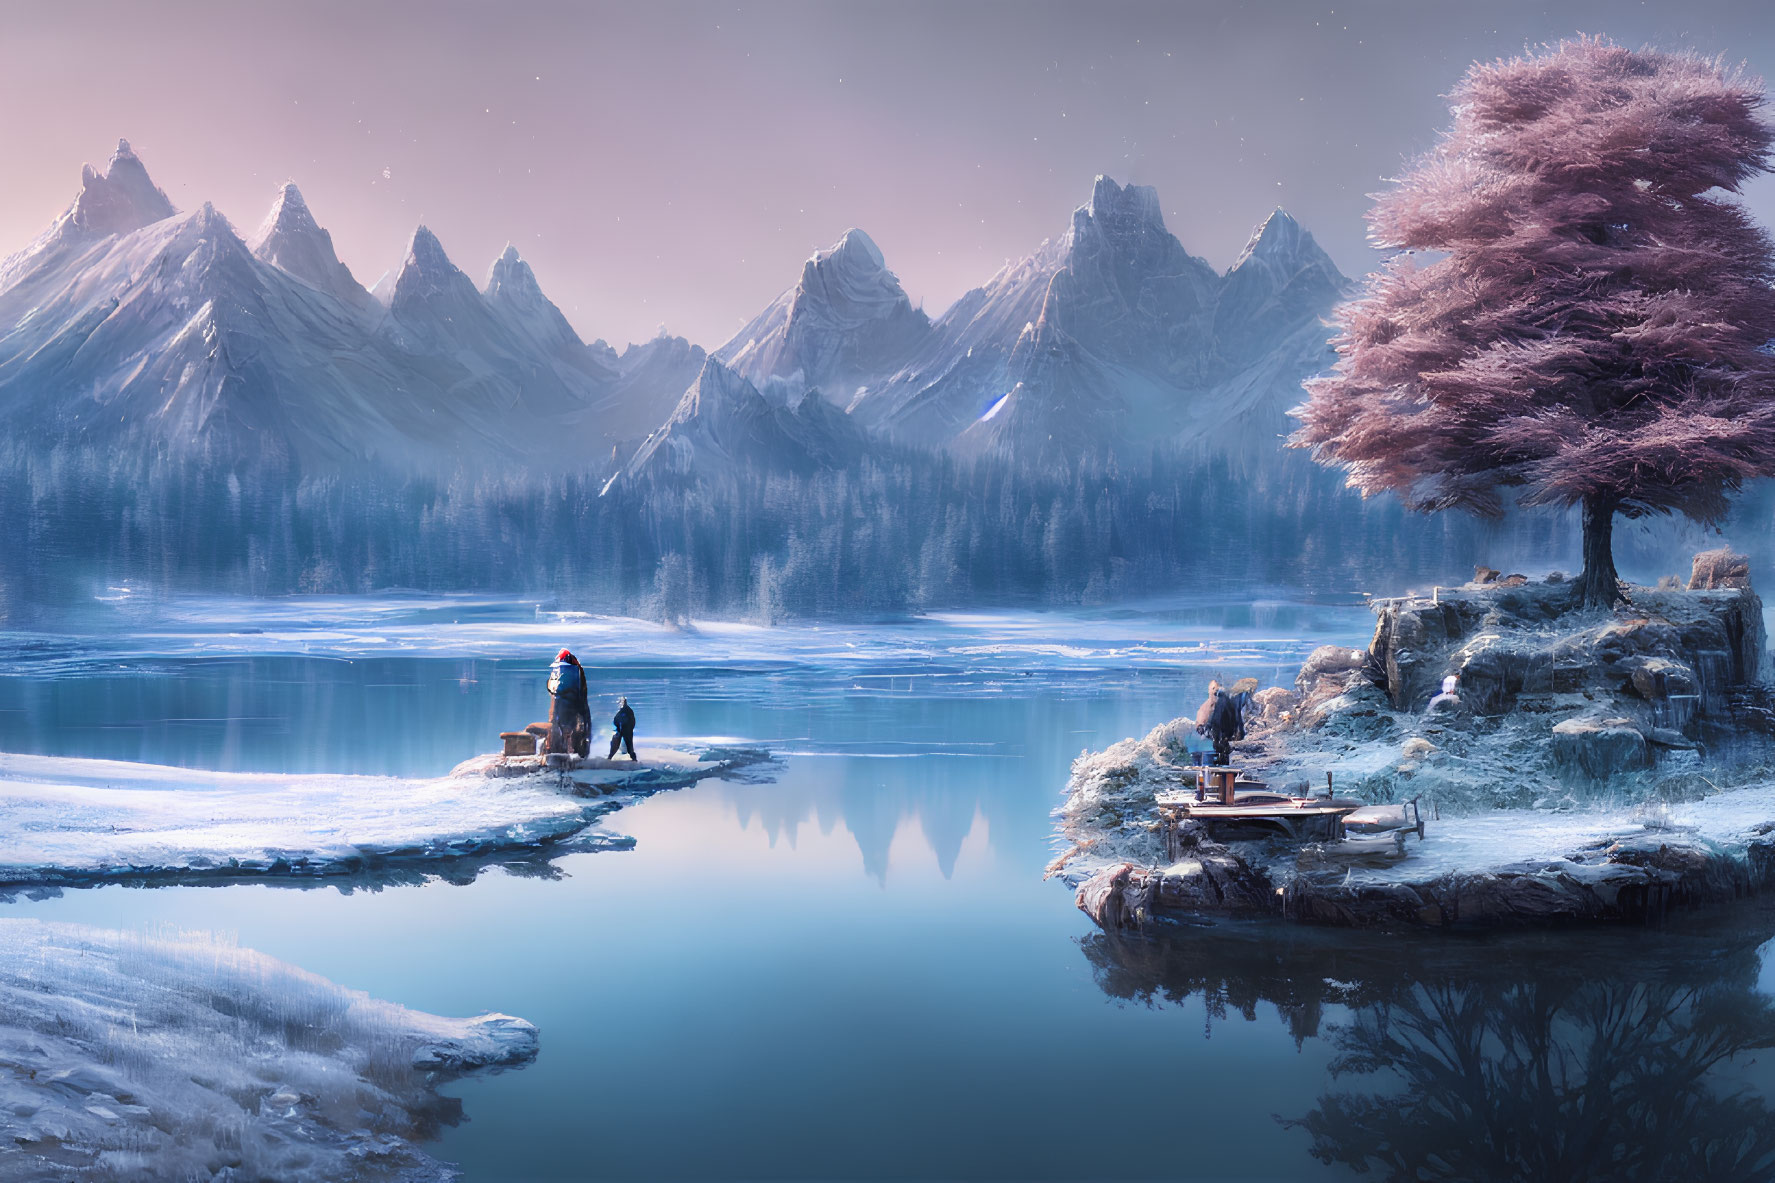 Snow-capped mountains, frozen lake, cherry blossom tree, figure on icy shore at twilight